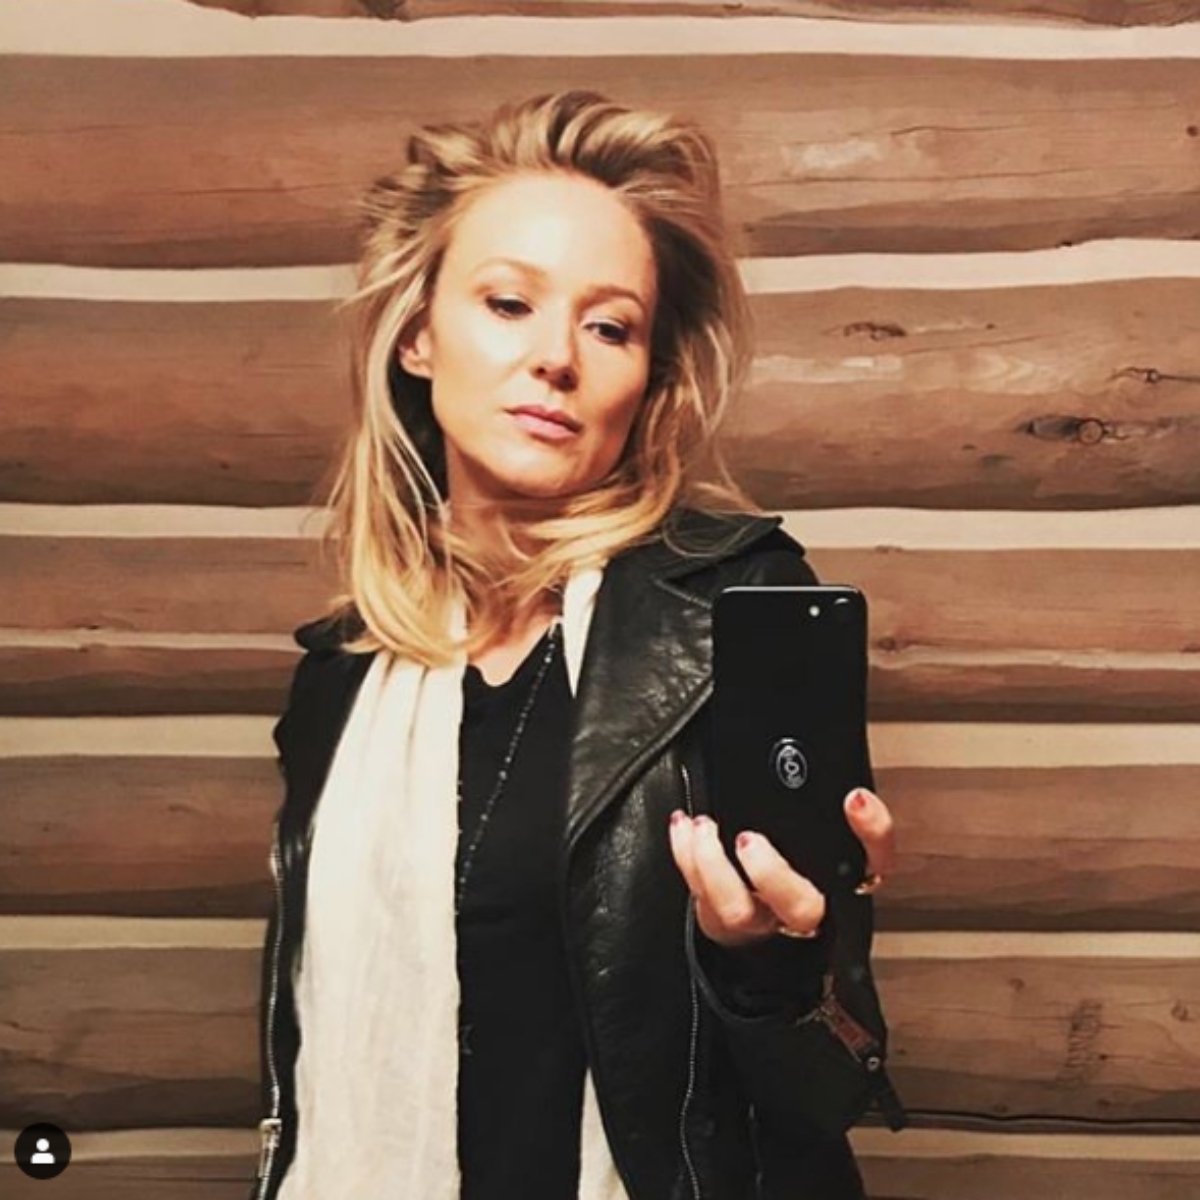 Singer Jewel's taking picture of new hair in mirror